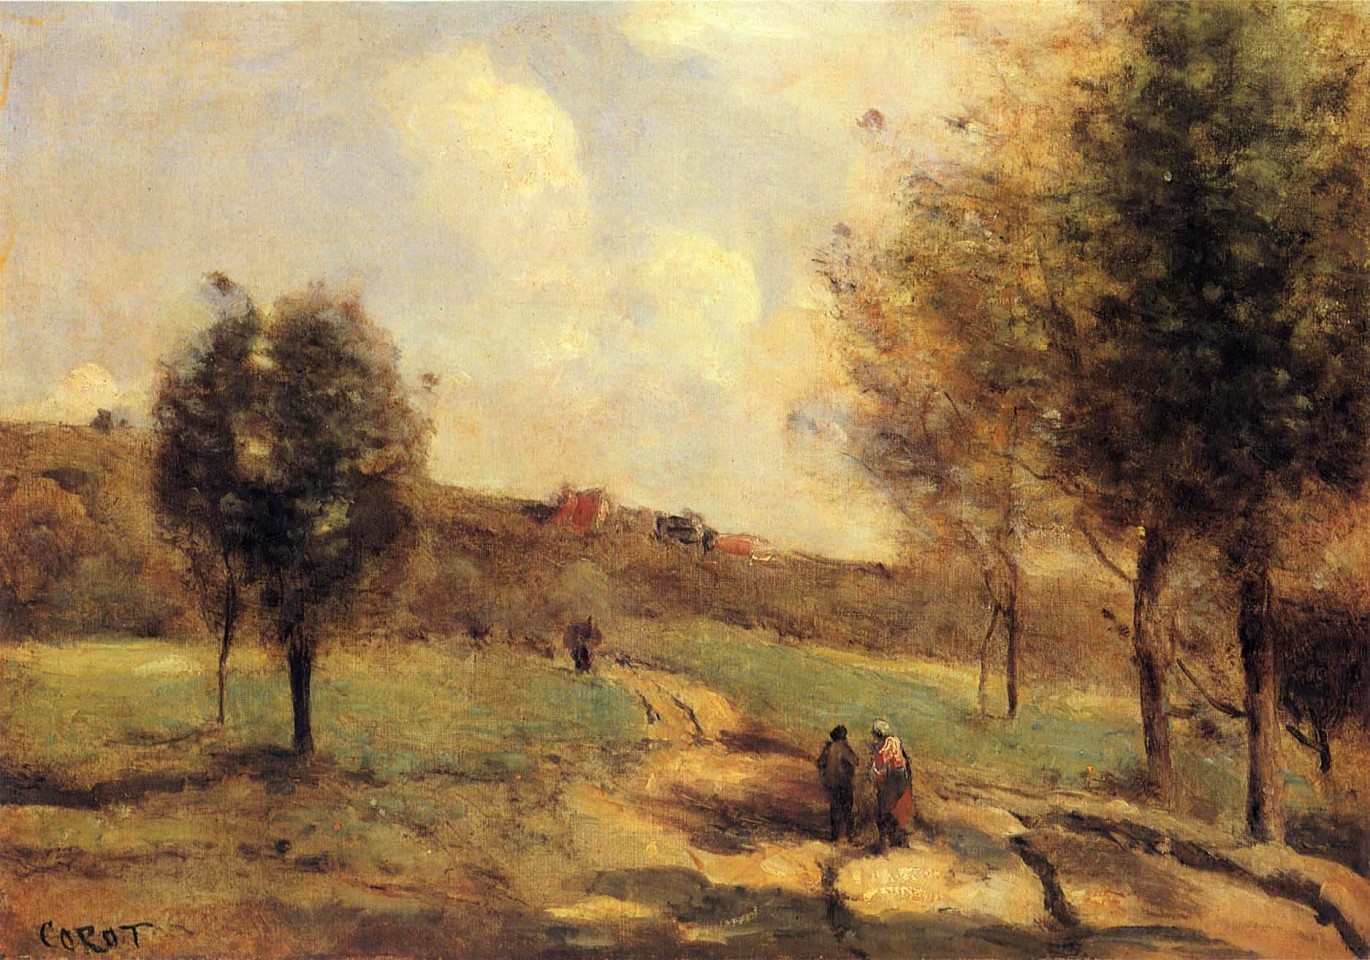 Jean Baptiste Camille Corot ,   Coubron - Route Montante  ,  ca. 1870  
  Oil on canvas ,  10 x 14 in. (25.4 x 35.6 cm)  
  COR-007-PA  
   Appraisal Value : $0.00 
 Location : $0.00 
 User3 : $0.00